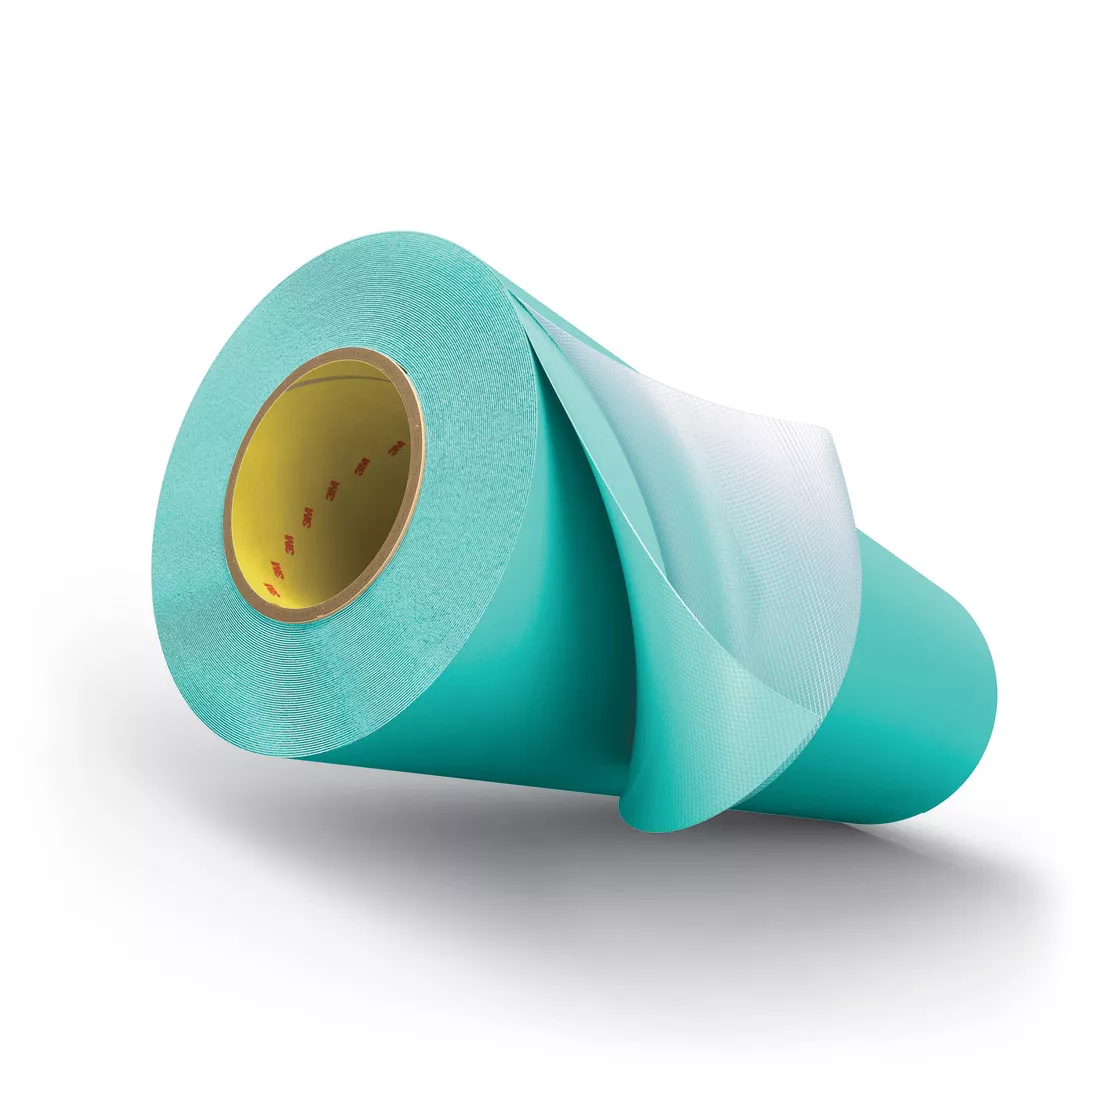 3M™ Cushion-Mount™ Plus Plate Mounting Tape E1720, Teal, 36 in x 25 yd,
20 mil, 1 roll per case